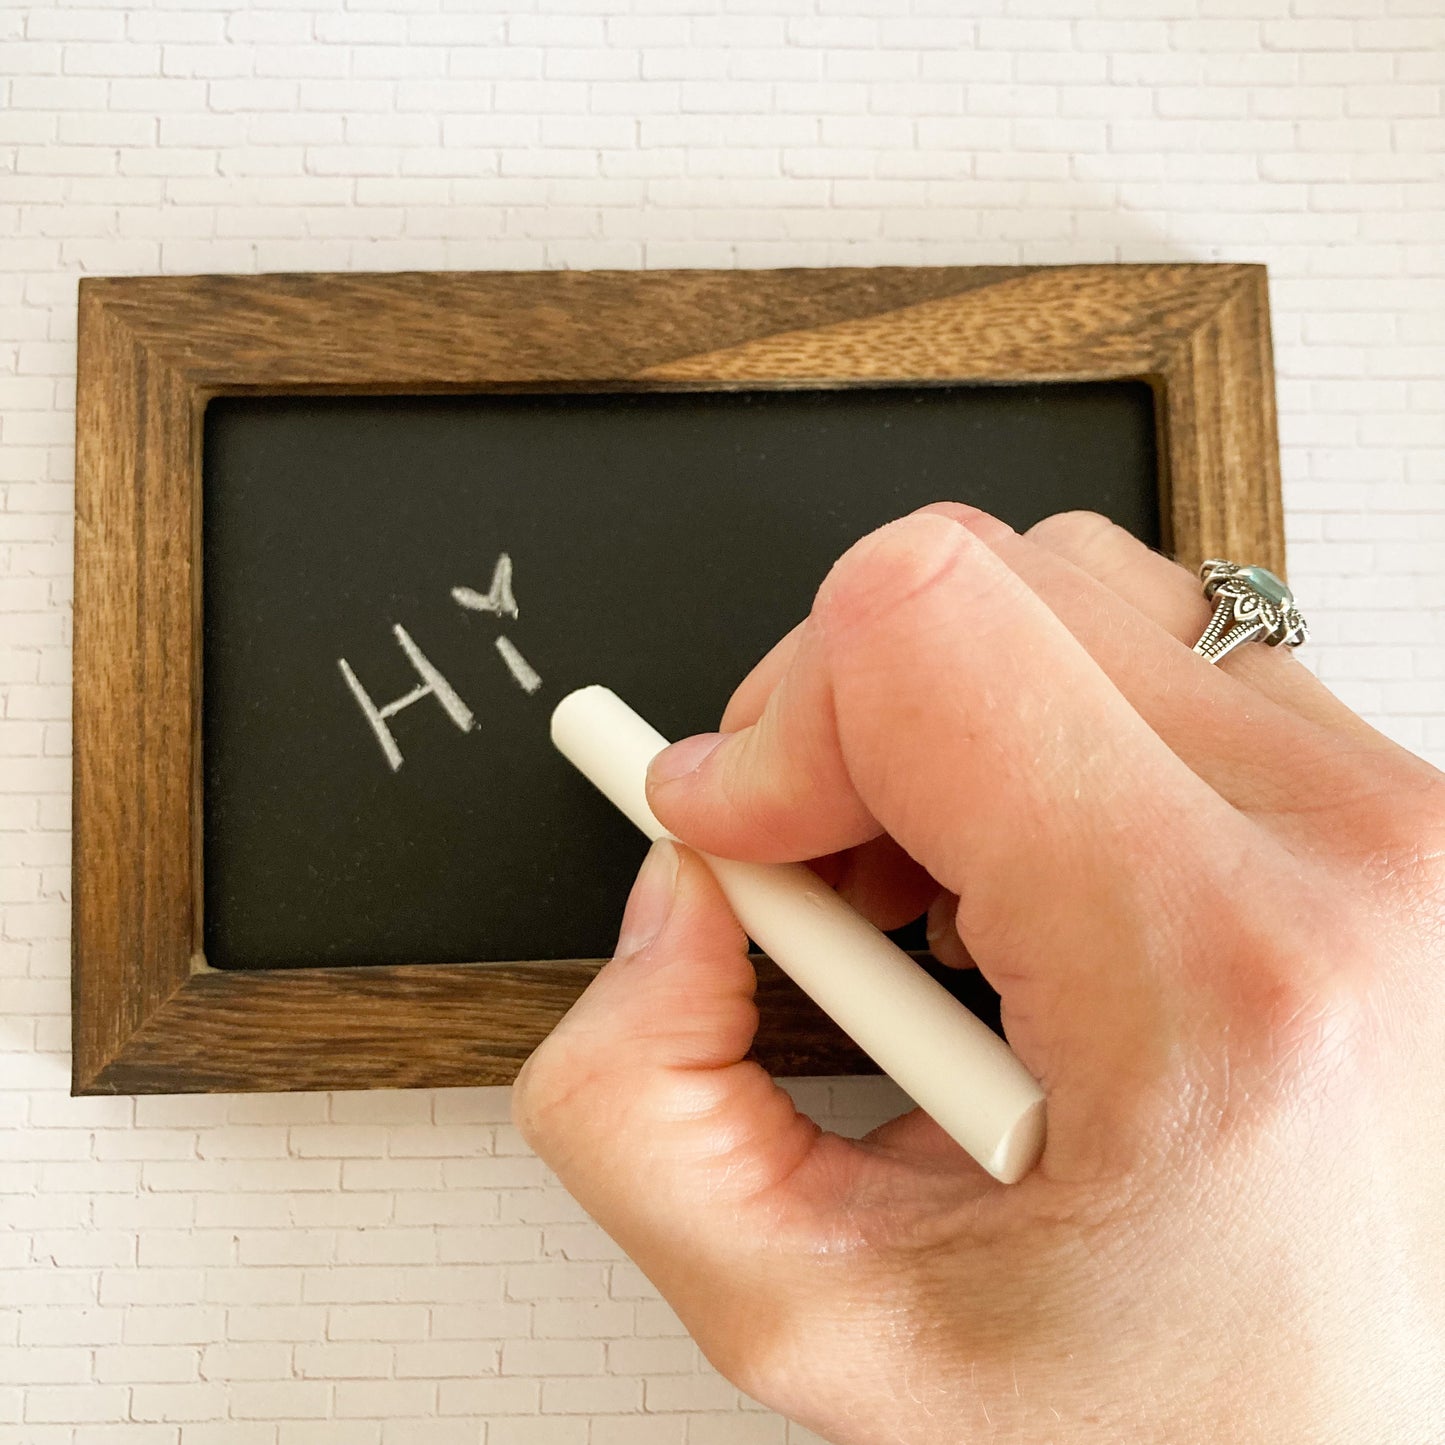 Hand writing Hi using chalk on Mini chalkboard 4 inches by 6 inches with wood frame stained brown real chalkboard slate